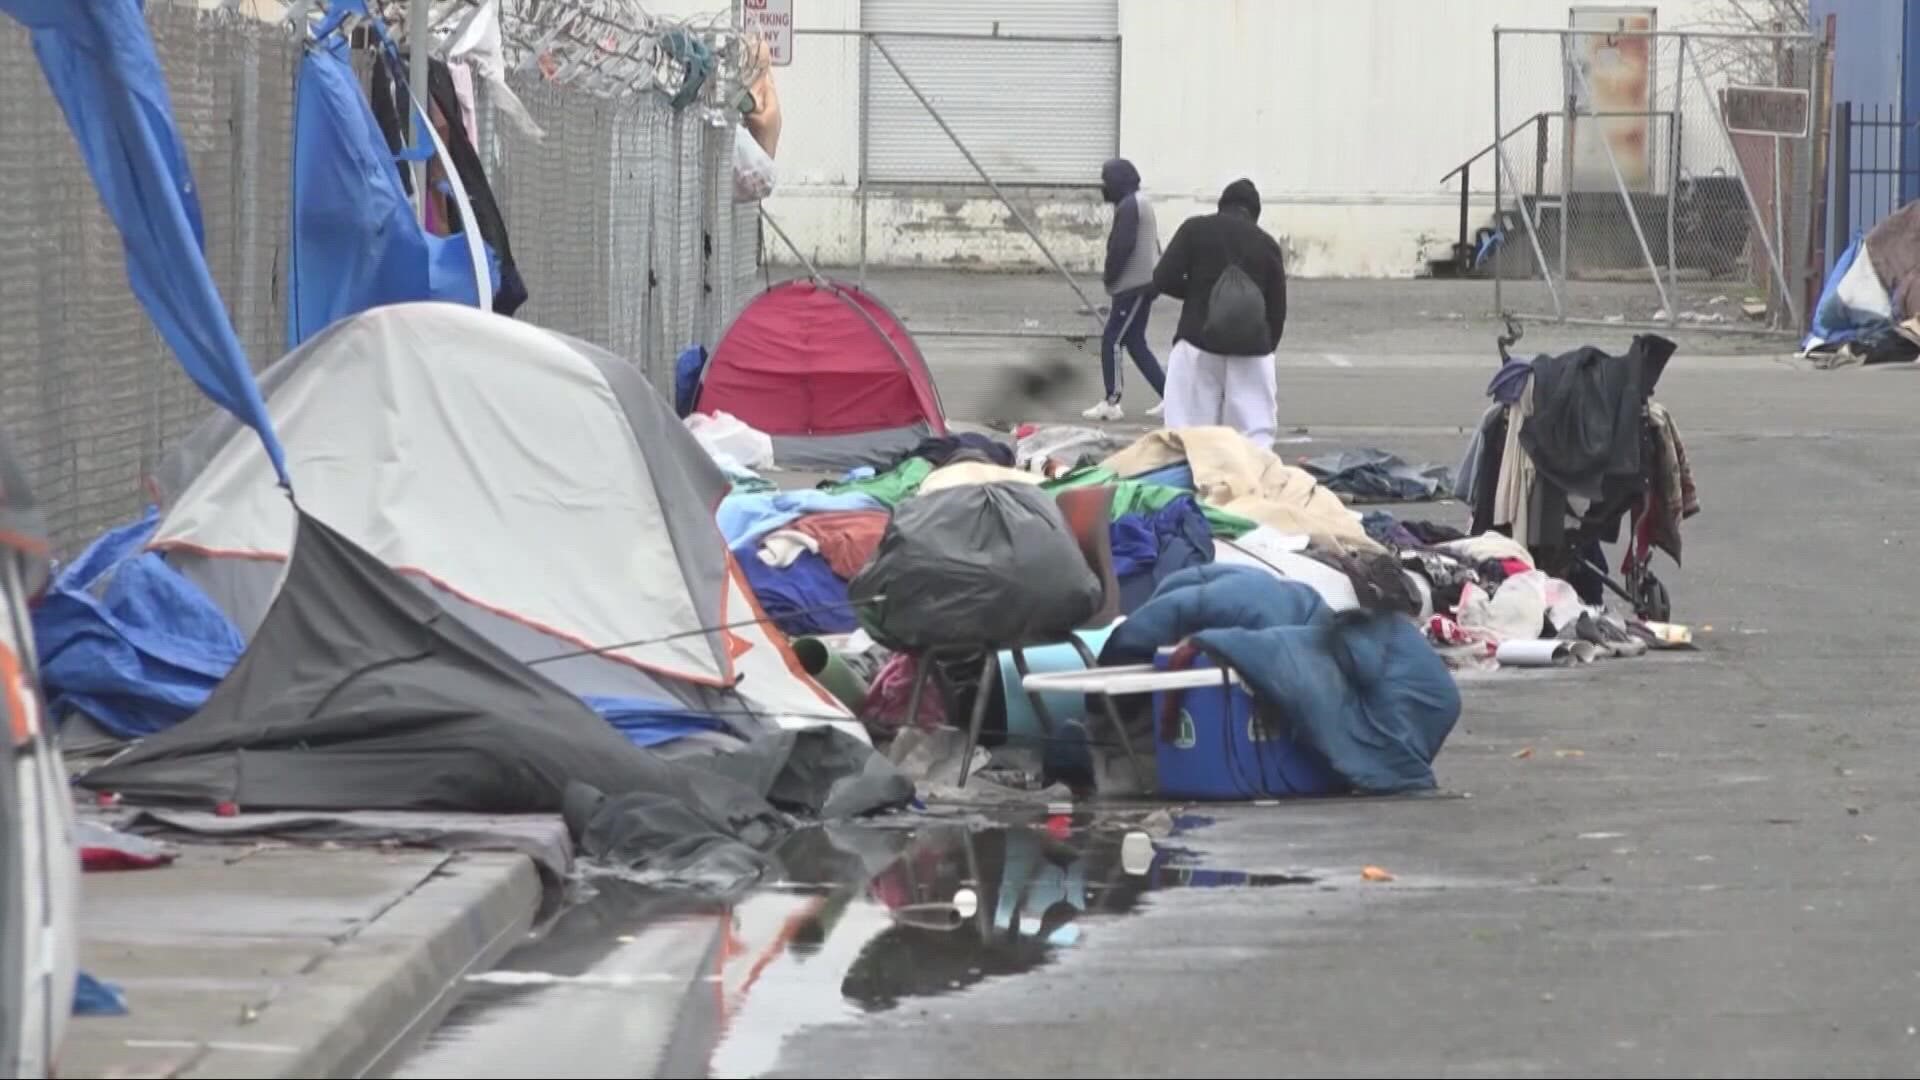 New data from the U.S. Department of Housing and Urban Developing is showing how the homeless crisis is magnified in California.